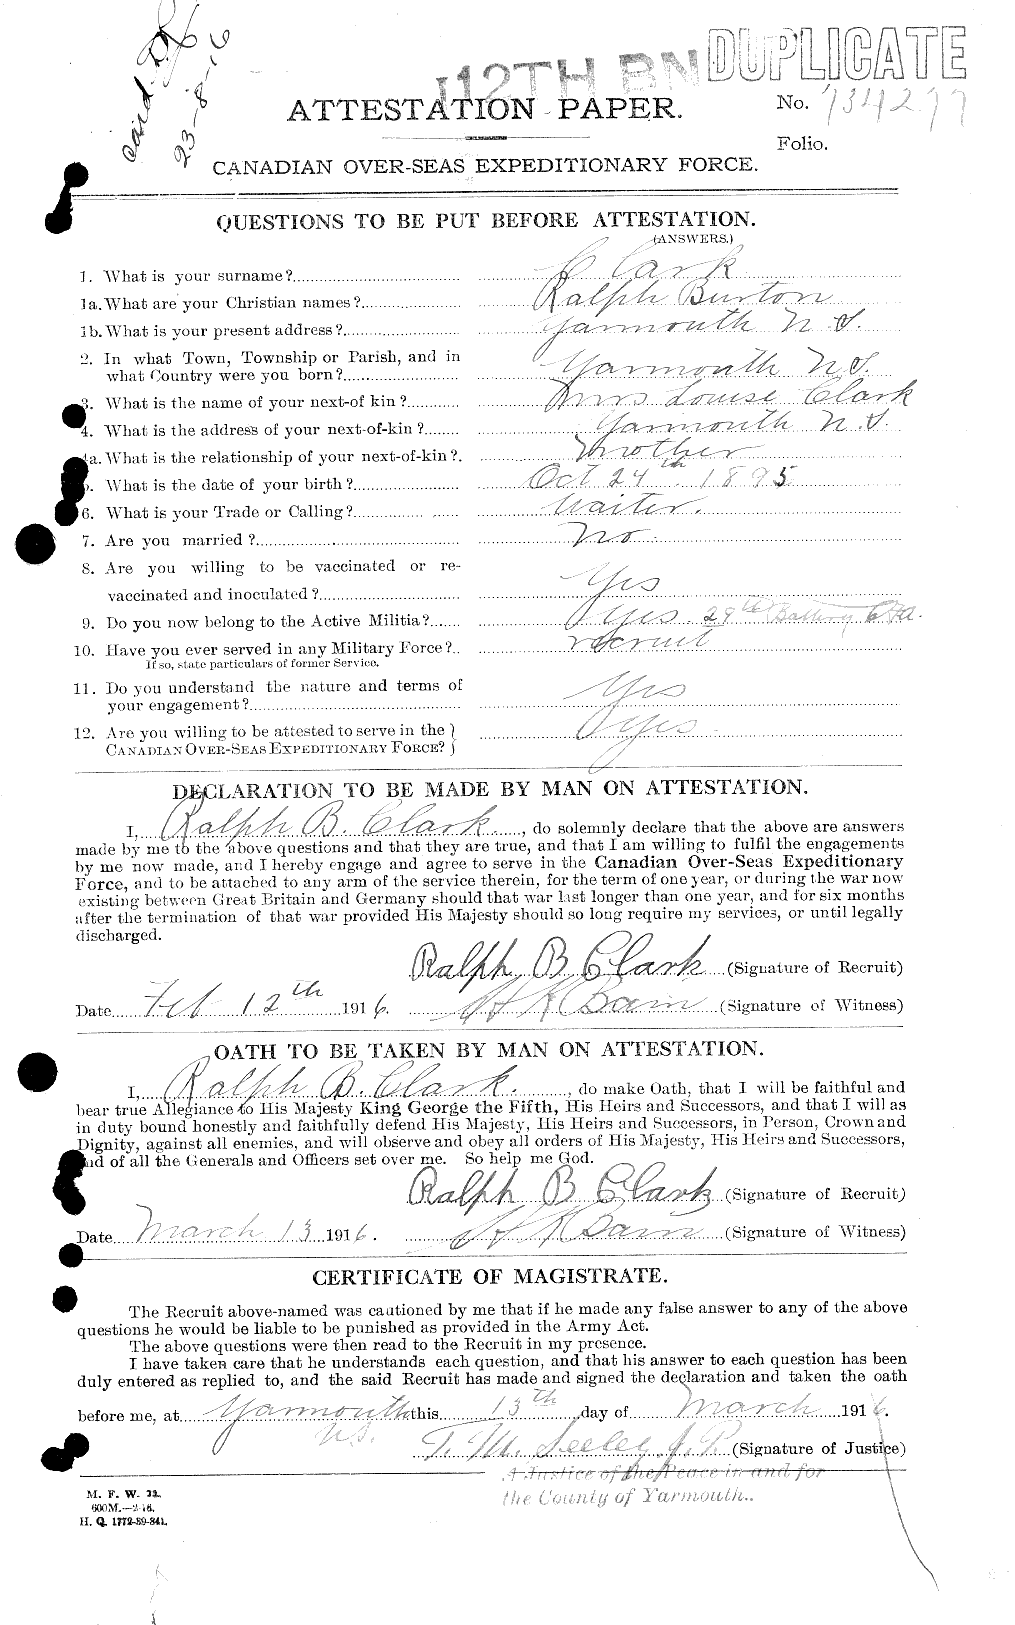 Personnel Records of the First World War - CEF 023493a